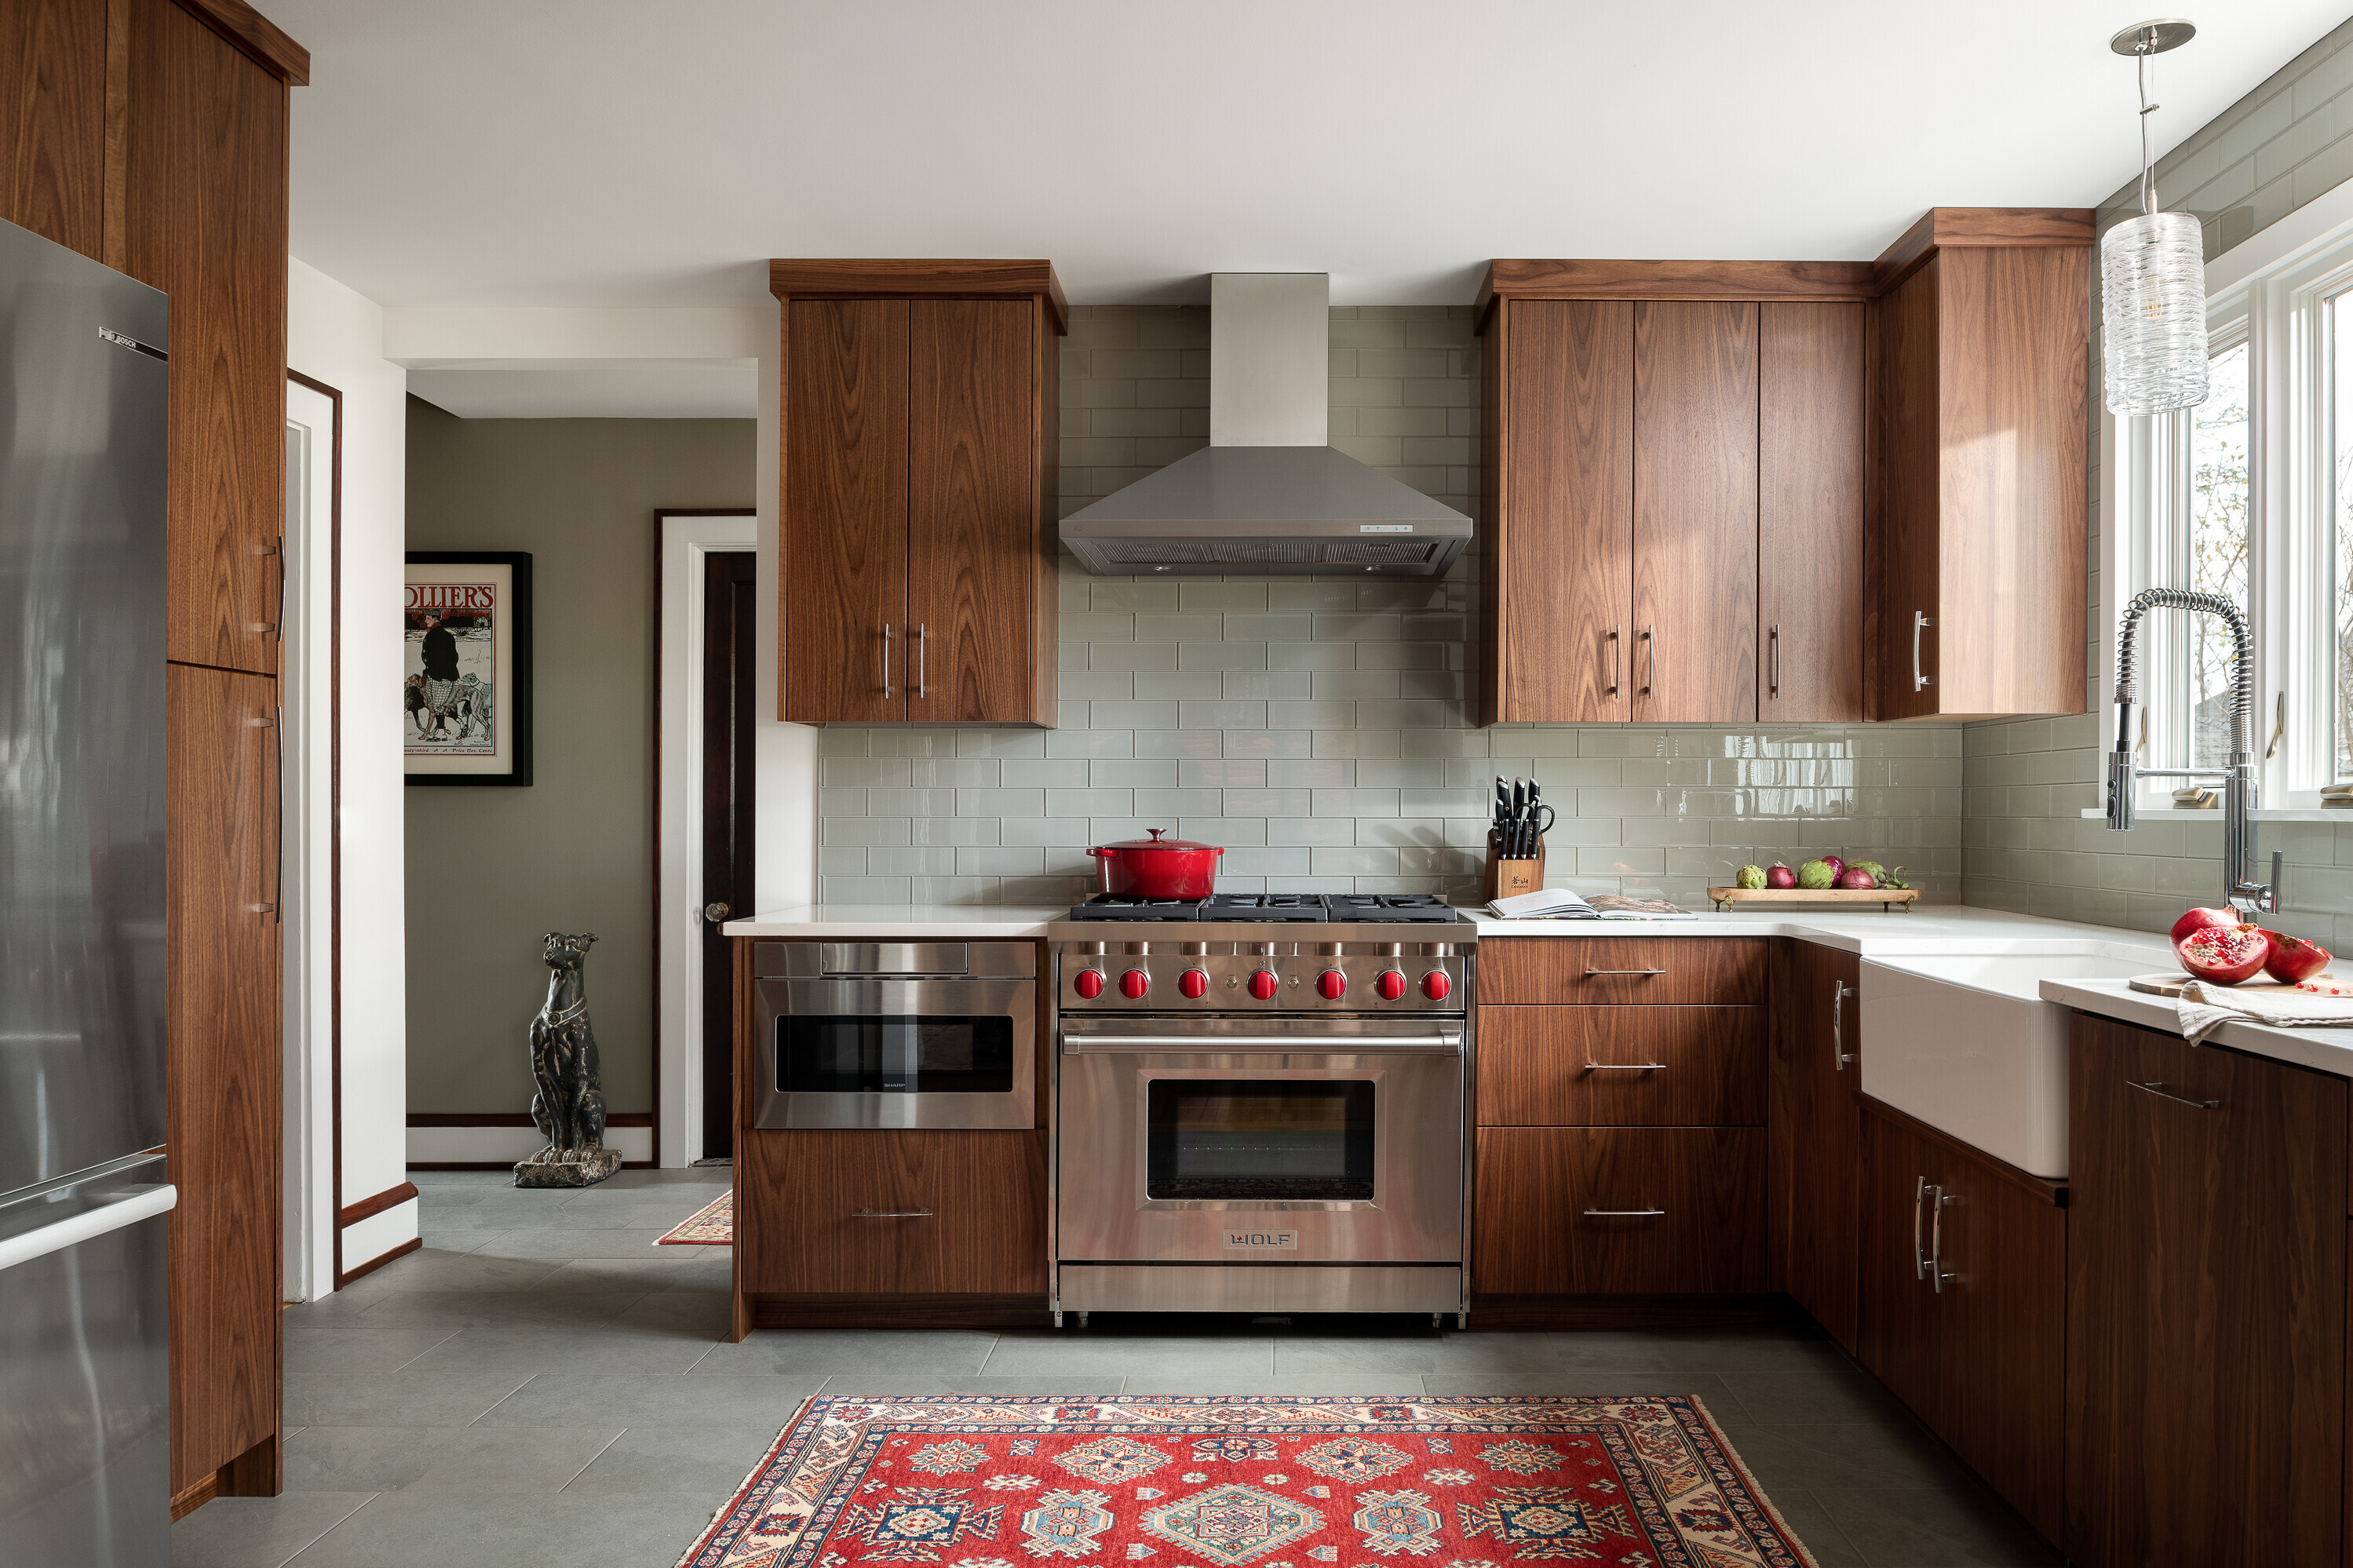 This kitchen renovation features custom walnut cabinetry.